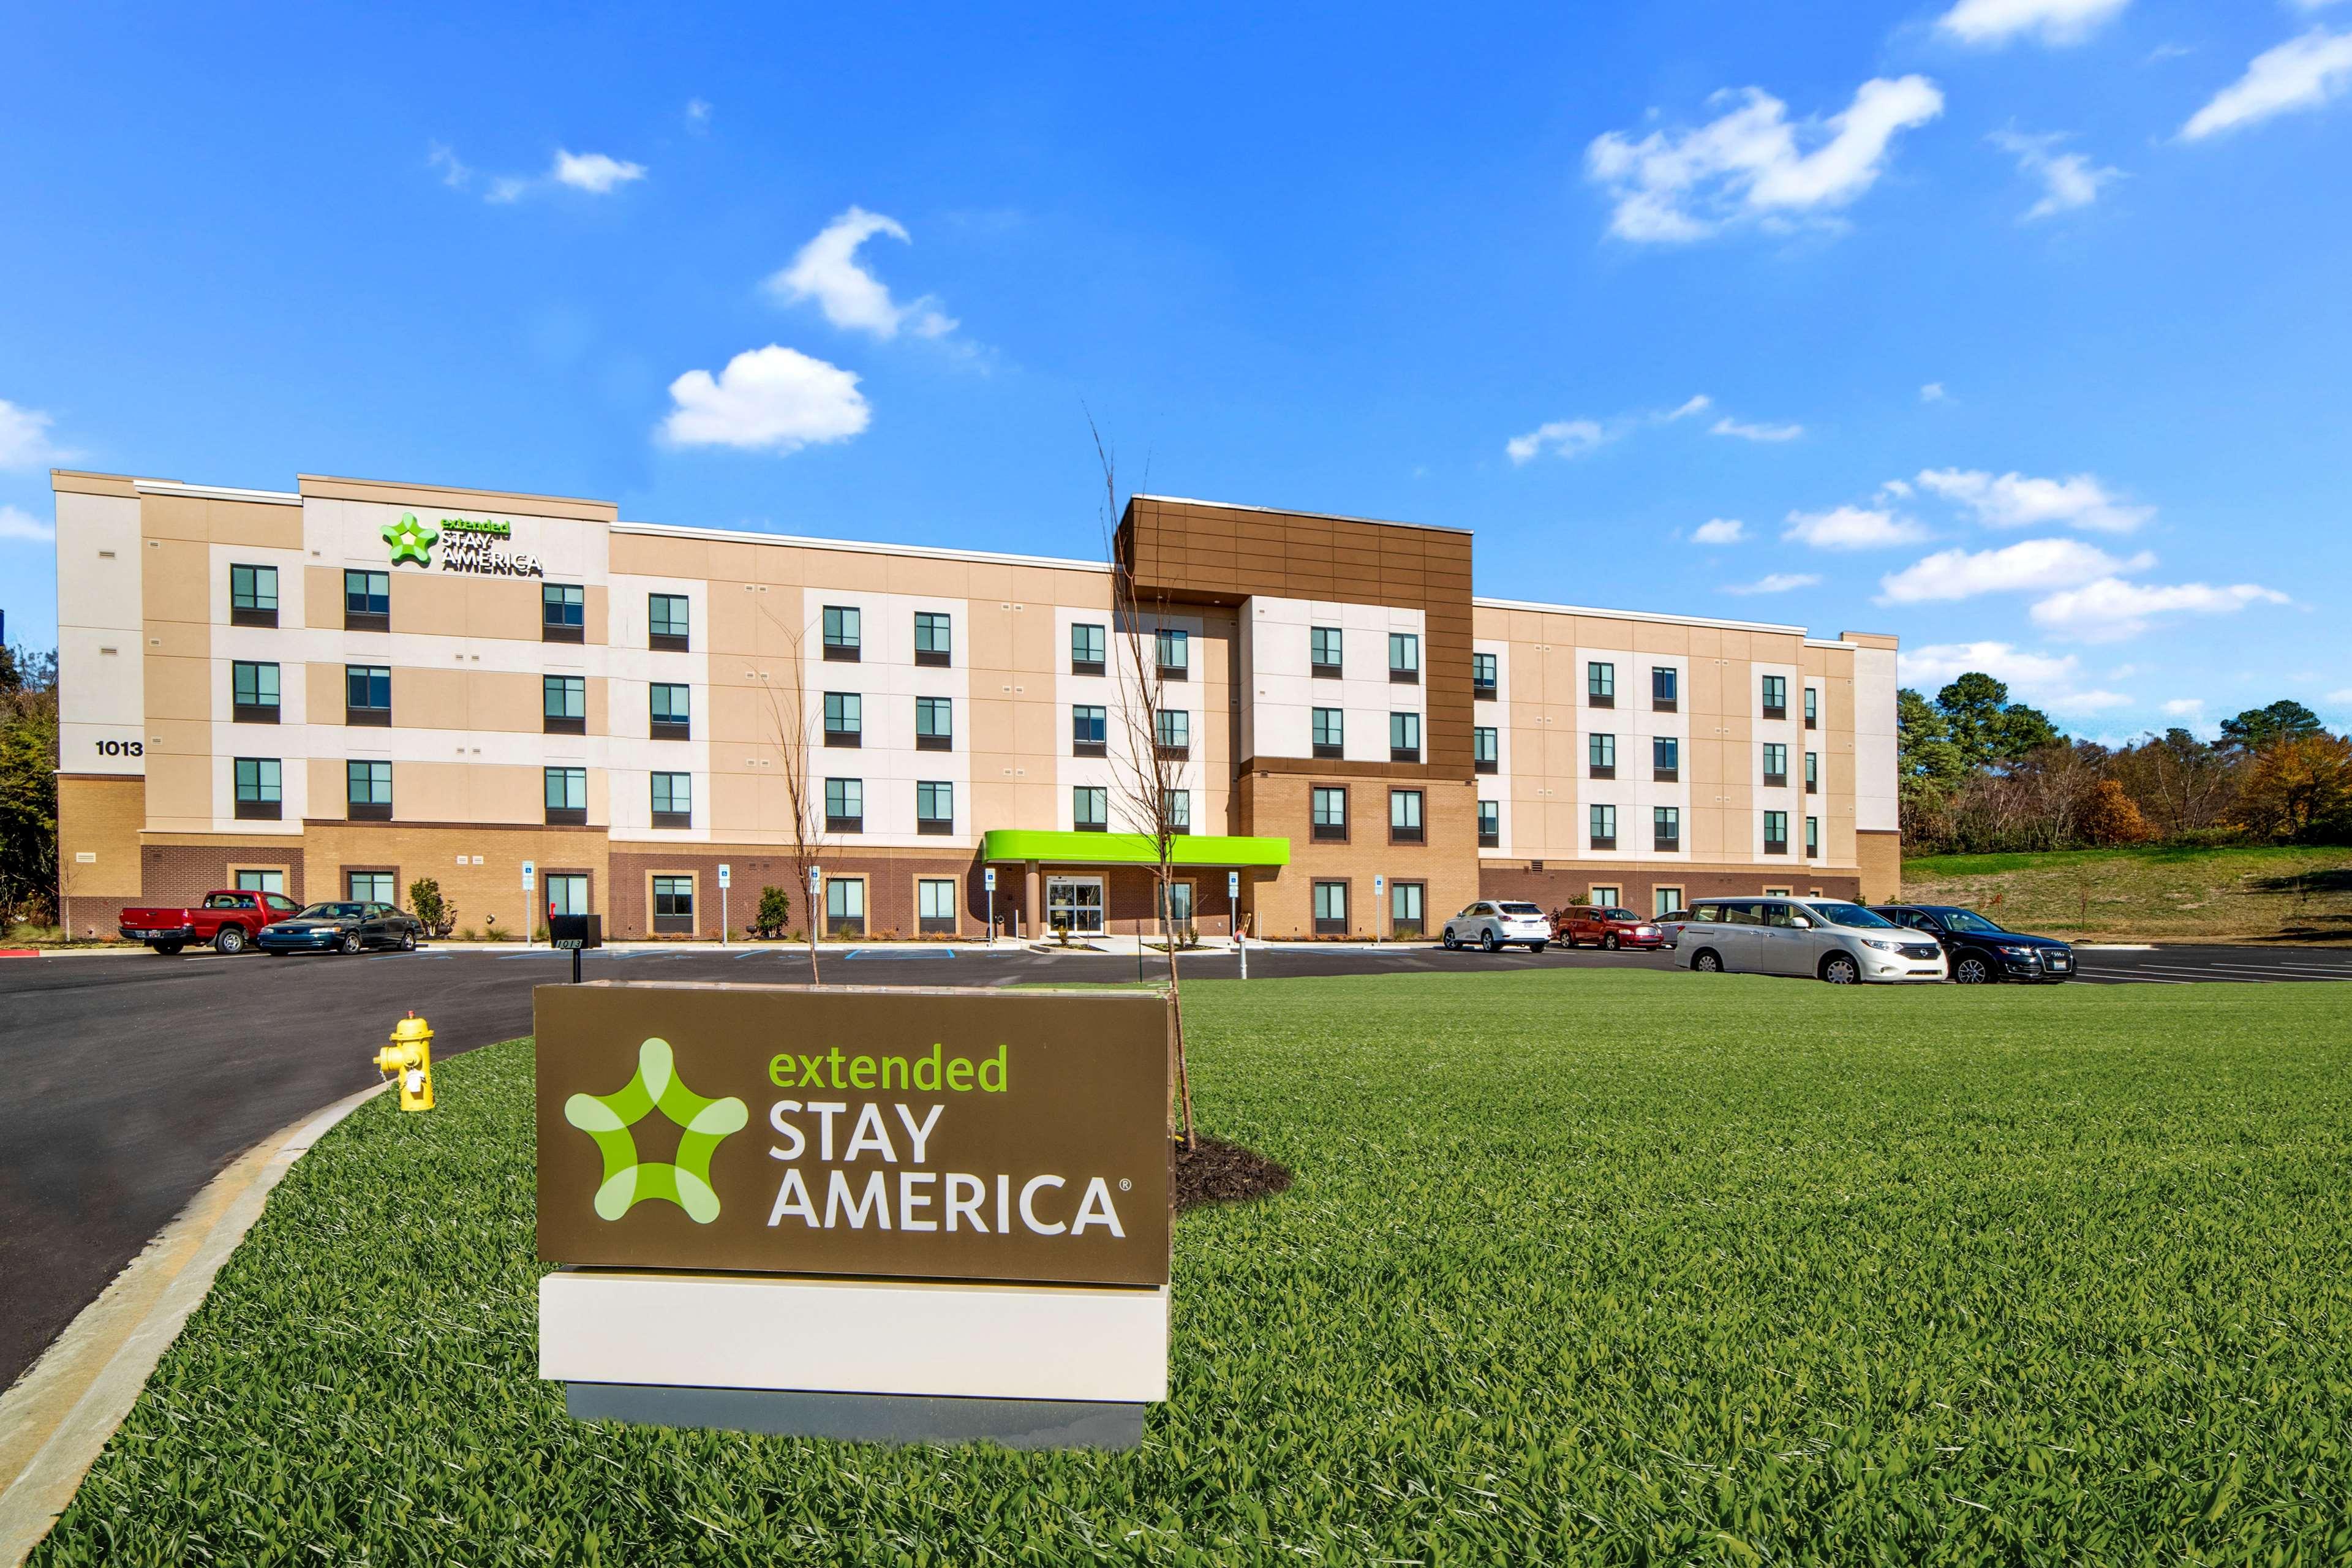 Extended Stay America Premier Suites - Greenville - Woodruff Road image